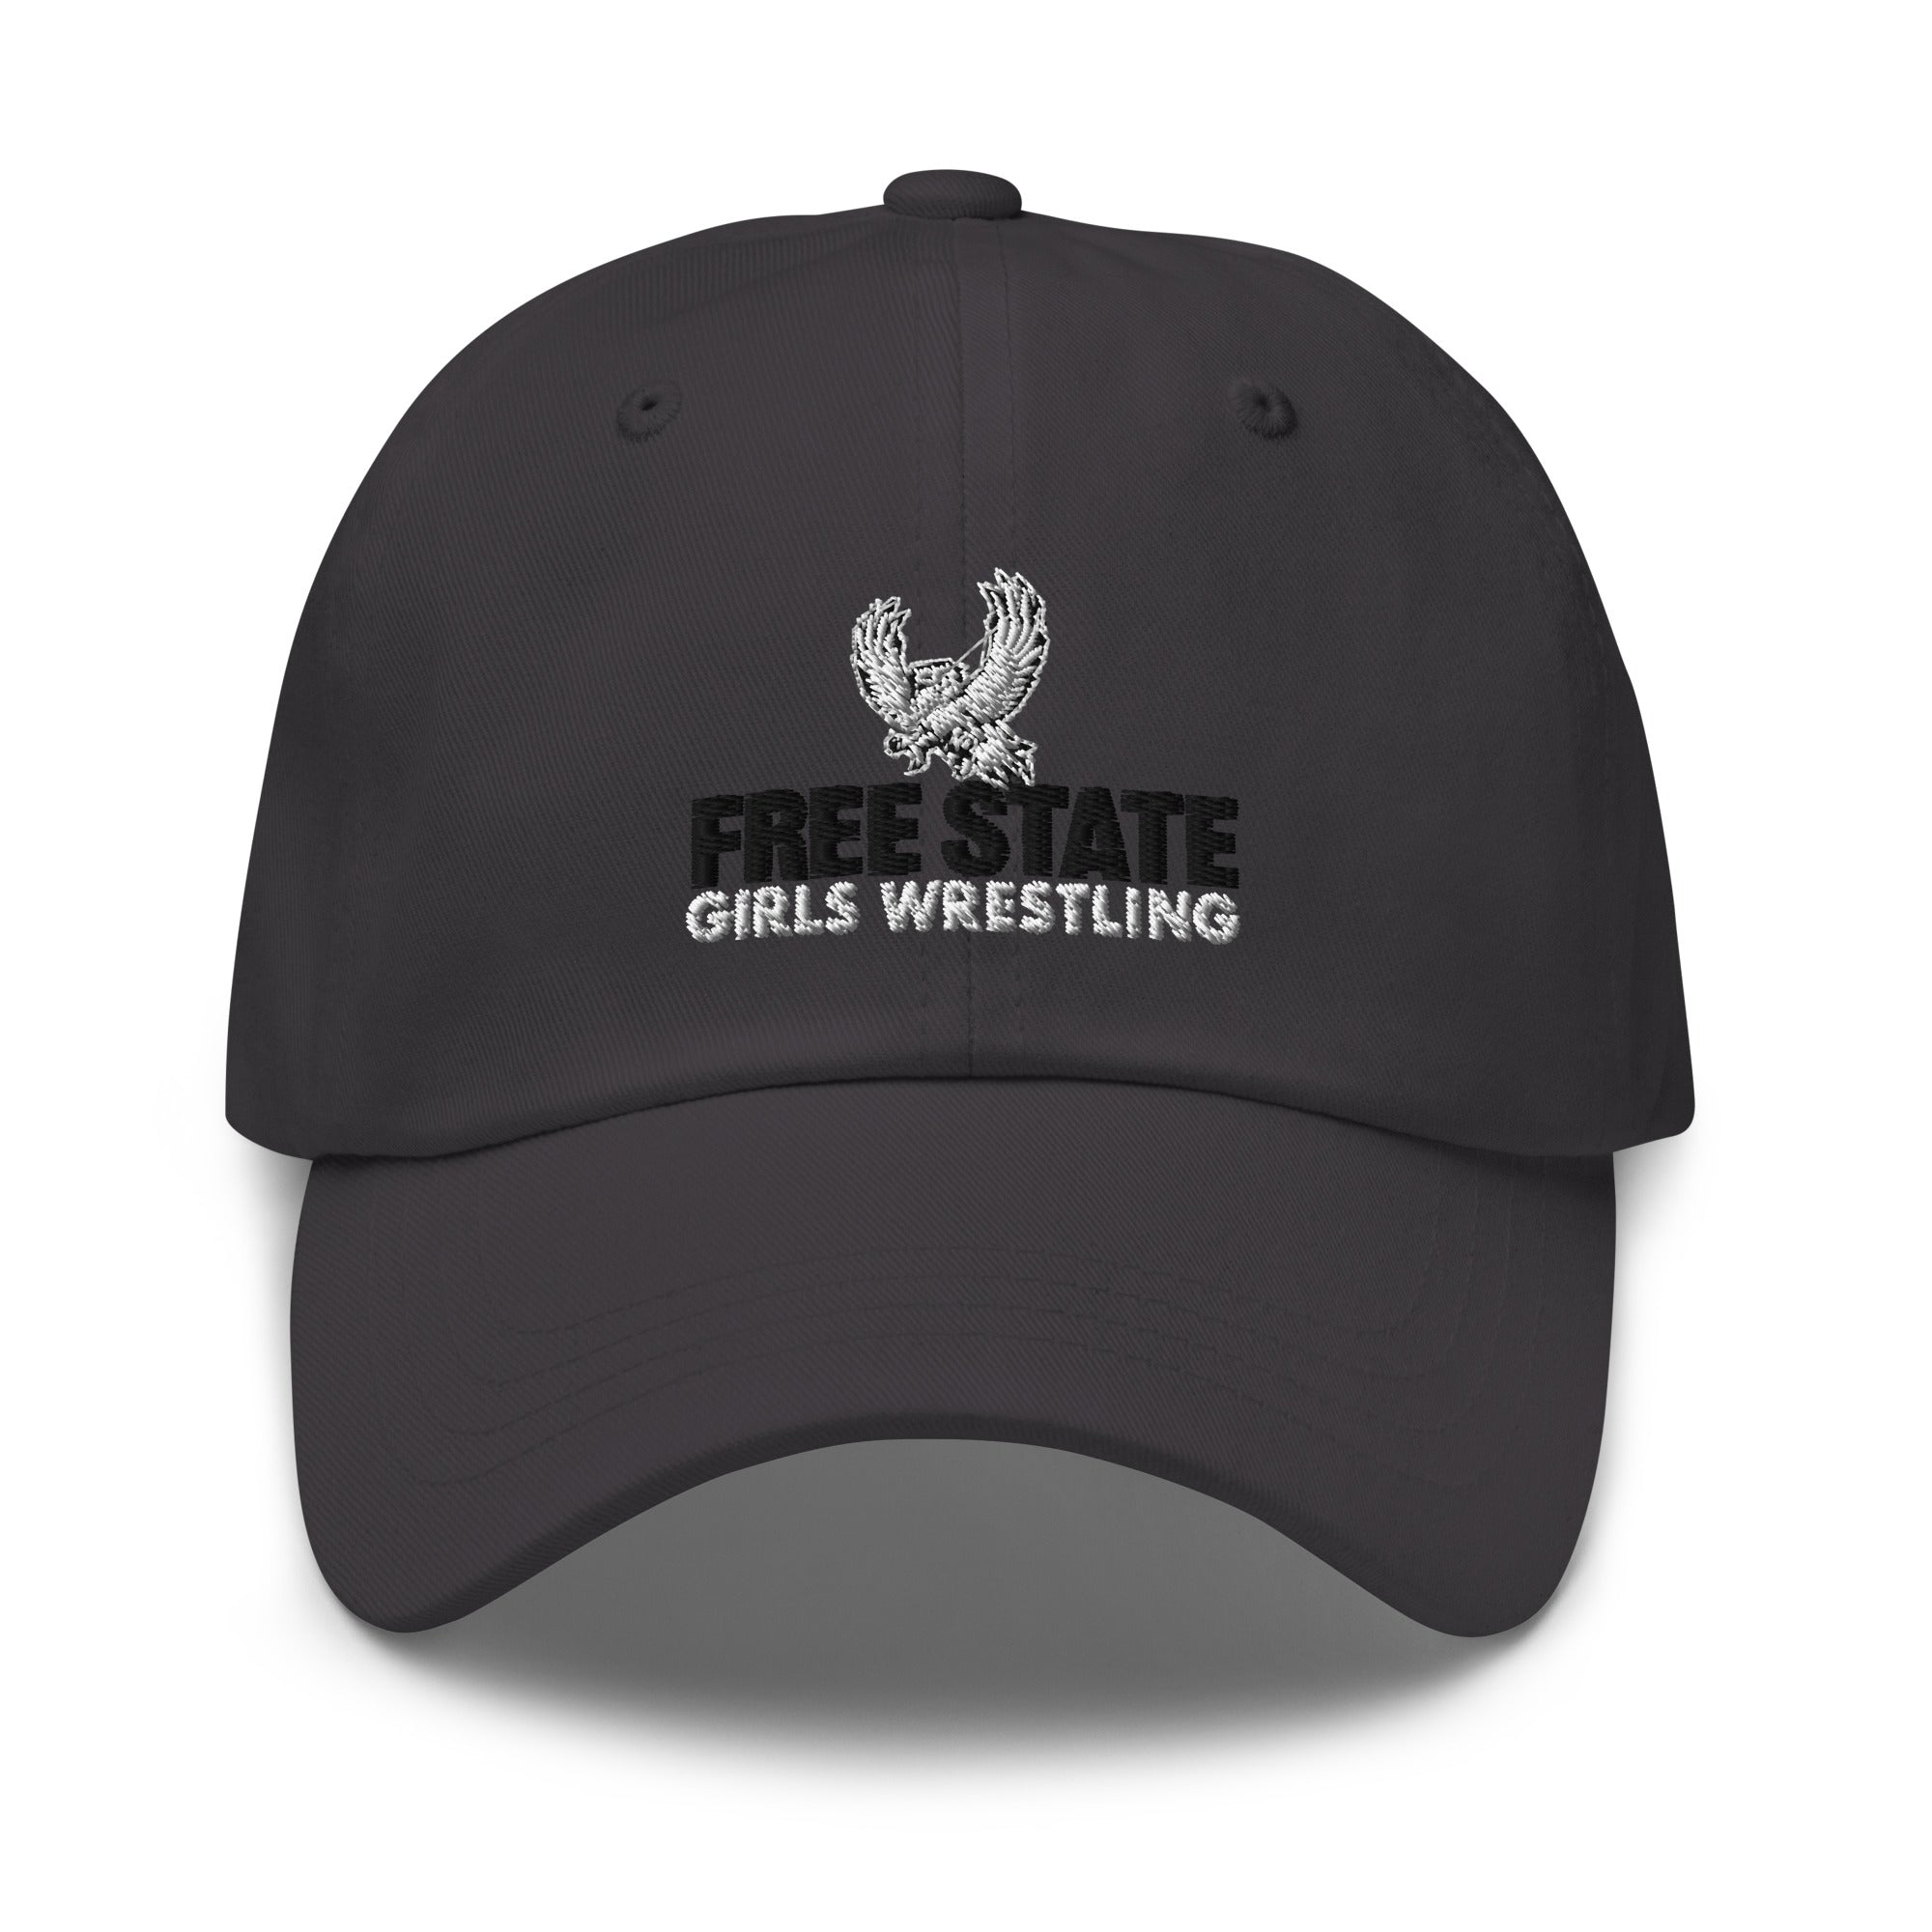 Lawrence Free State Girls Wrestling  Classic Dad Hat